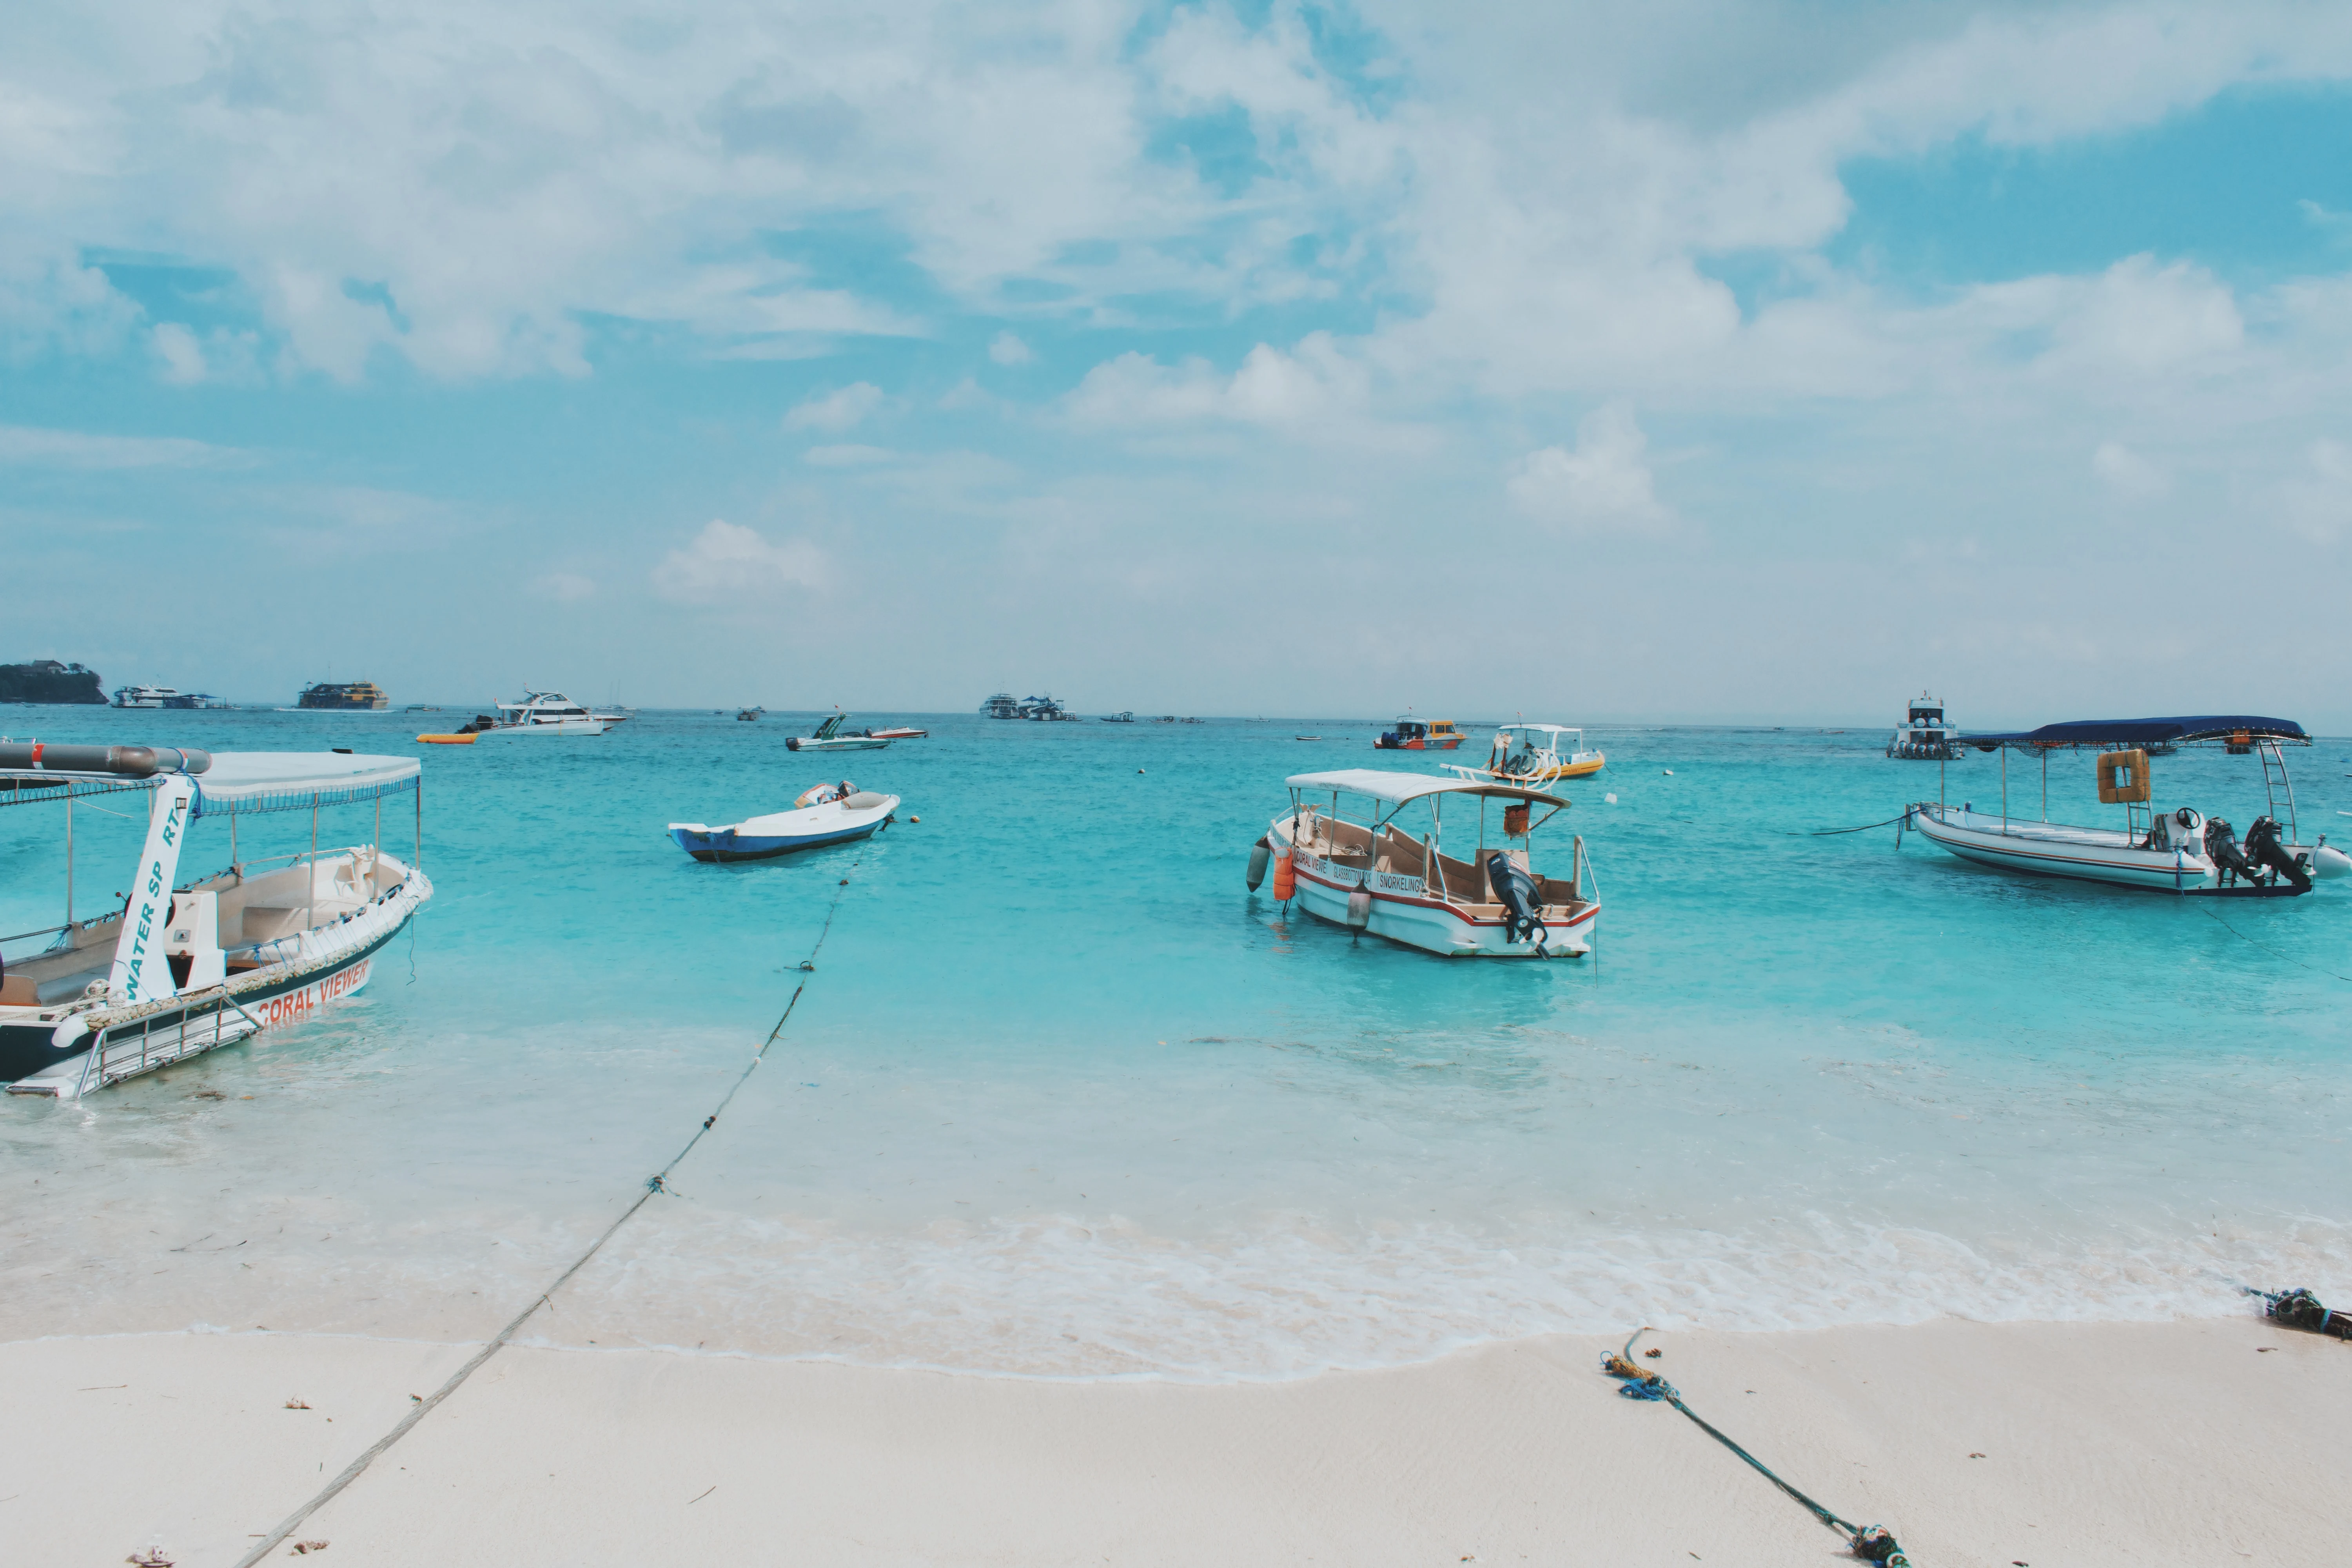 How to get from Sanur to Nusa Lembongan By Ferry, Sanur to Nusa Lembongan, cheapest way from Sanur to Nusa Lembongan, best way from Sanur to Nusa Lembongan, ferry from Sanur to Nusa Lembongan, ferry schedule from Sanur to Nusa Lembongan, ferry fare from Sanur to Nusa Lembongan, how to get to nusa Lembongan, boat to nusa Lembongan, bali to nusa Lembongan, bali to nusa Lembongan ferry, Bali to Nusa Lembongan
, how to get to Nusa Lembongan from Bali, how to get to nusa lembongan, bali to nusa lembongan, nusa lembongan to nusa penida, ubud to nusa lembongan, boat to nusa lembongan